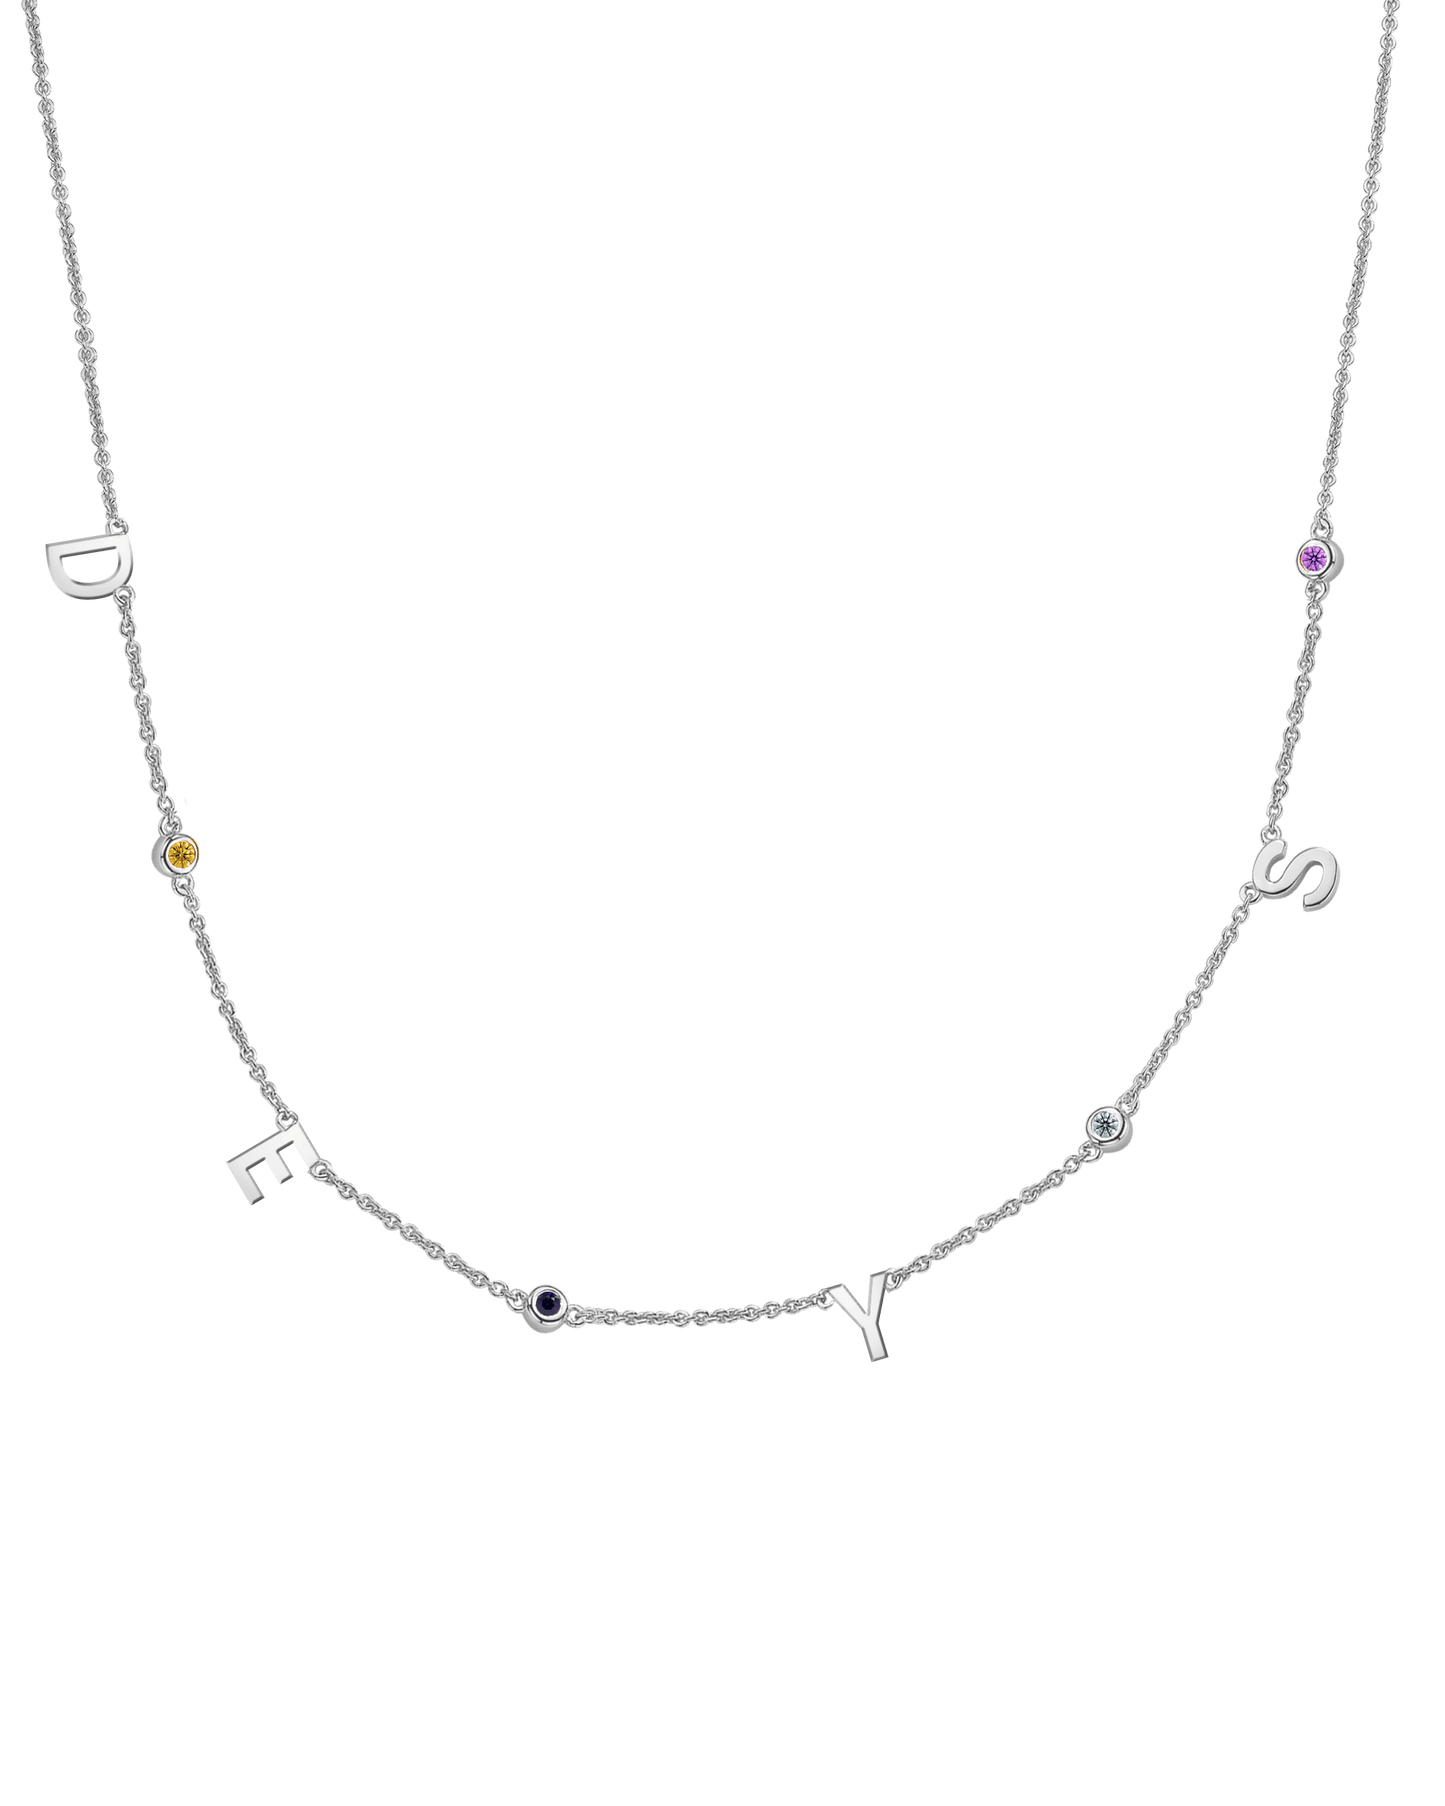 Initial Birthstone Necklace - 925 Sterling Silver Necklaces magal-dev 4 Initials + 4 Birthstones Adjustable 16-17" (40cm-43cm) 